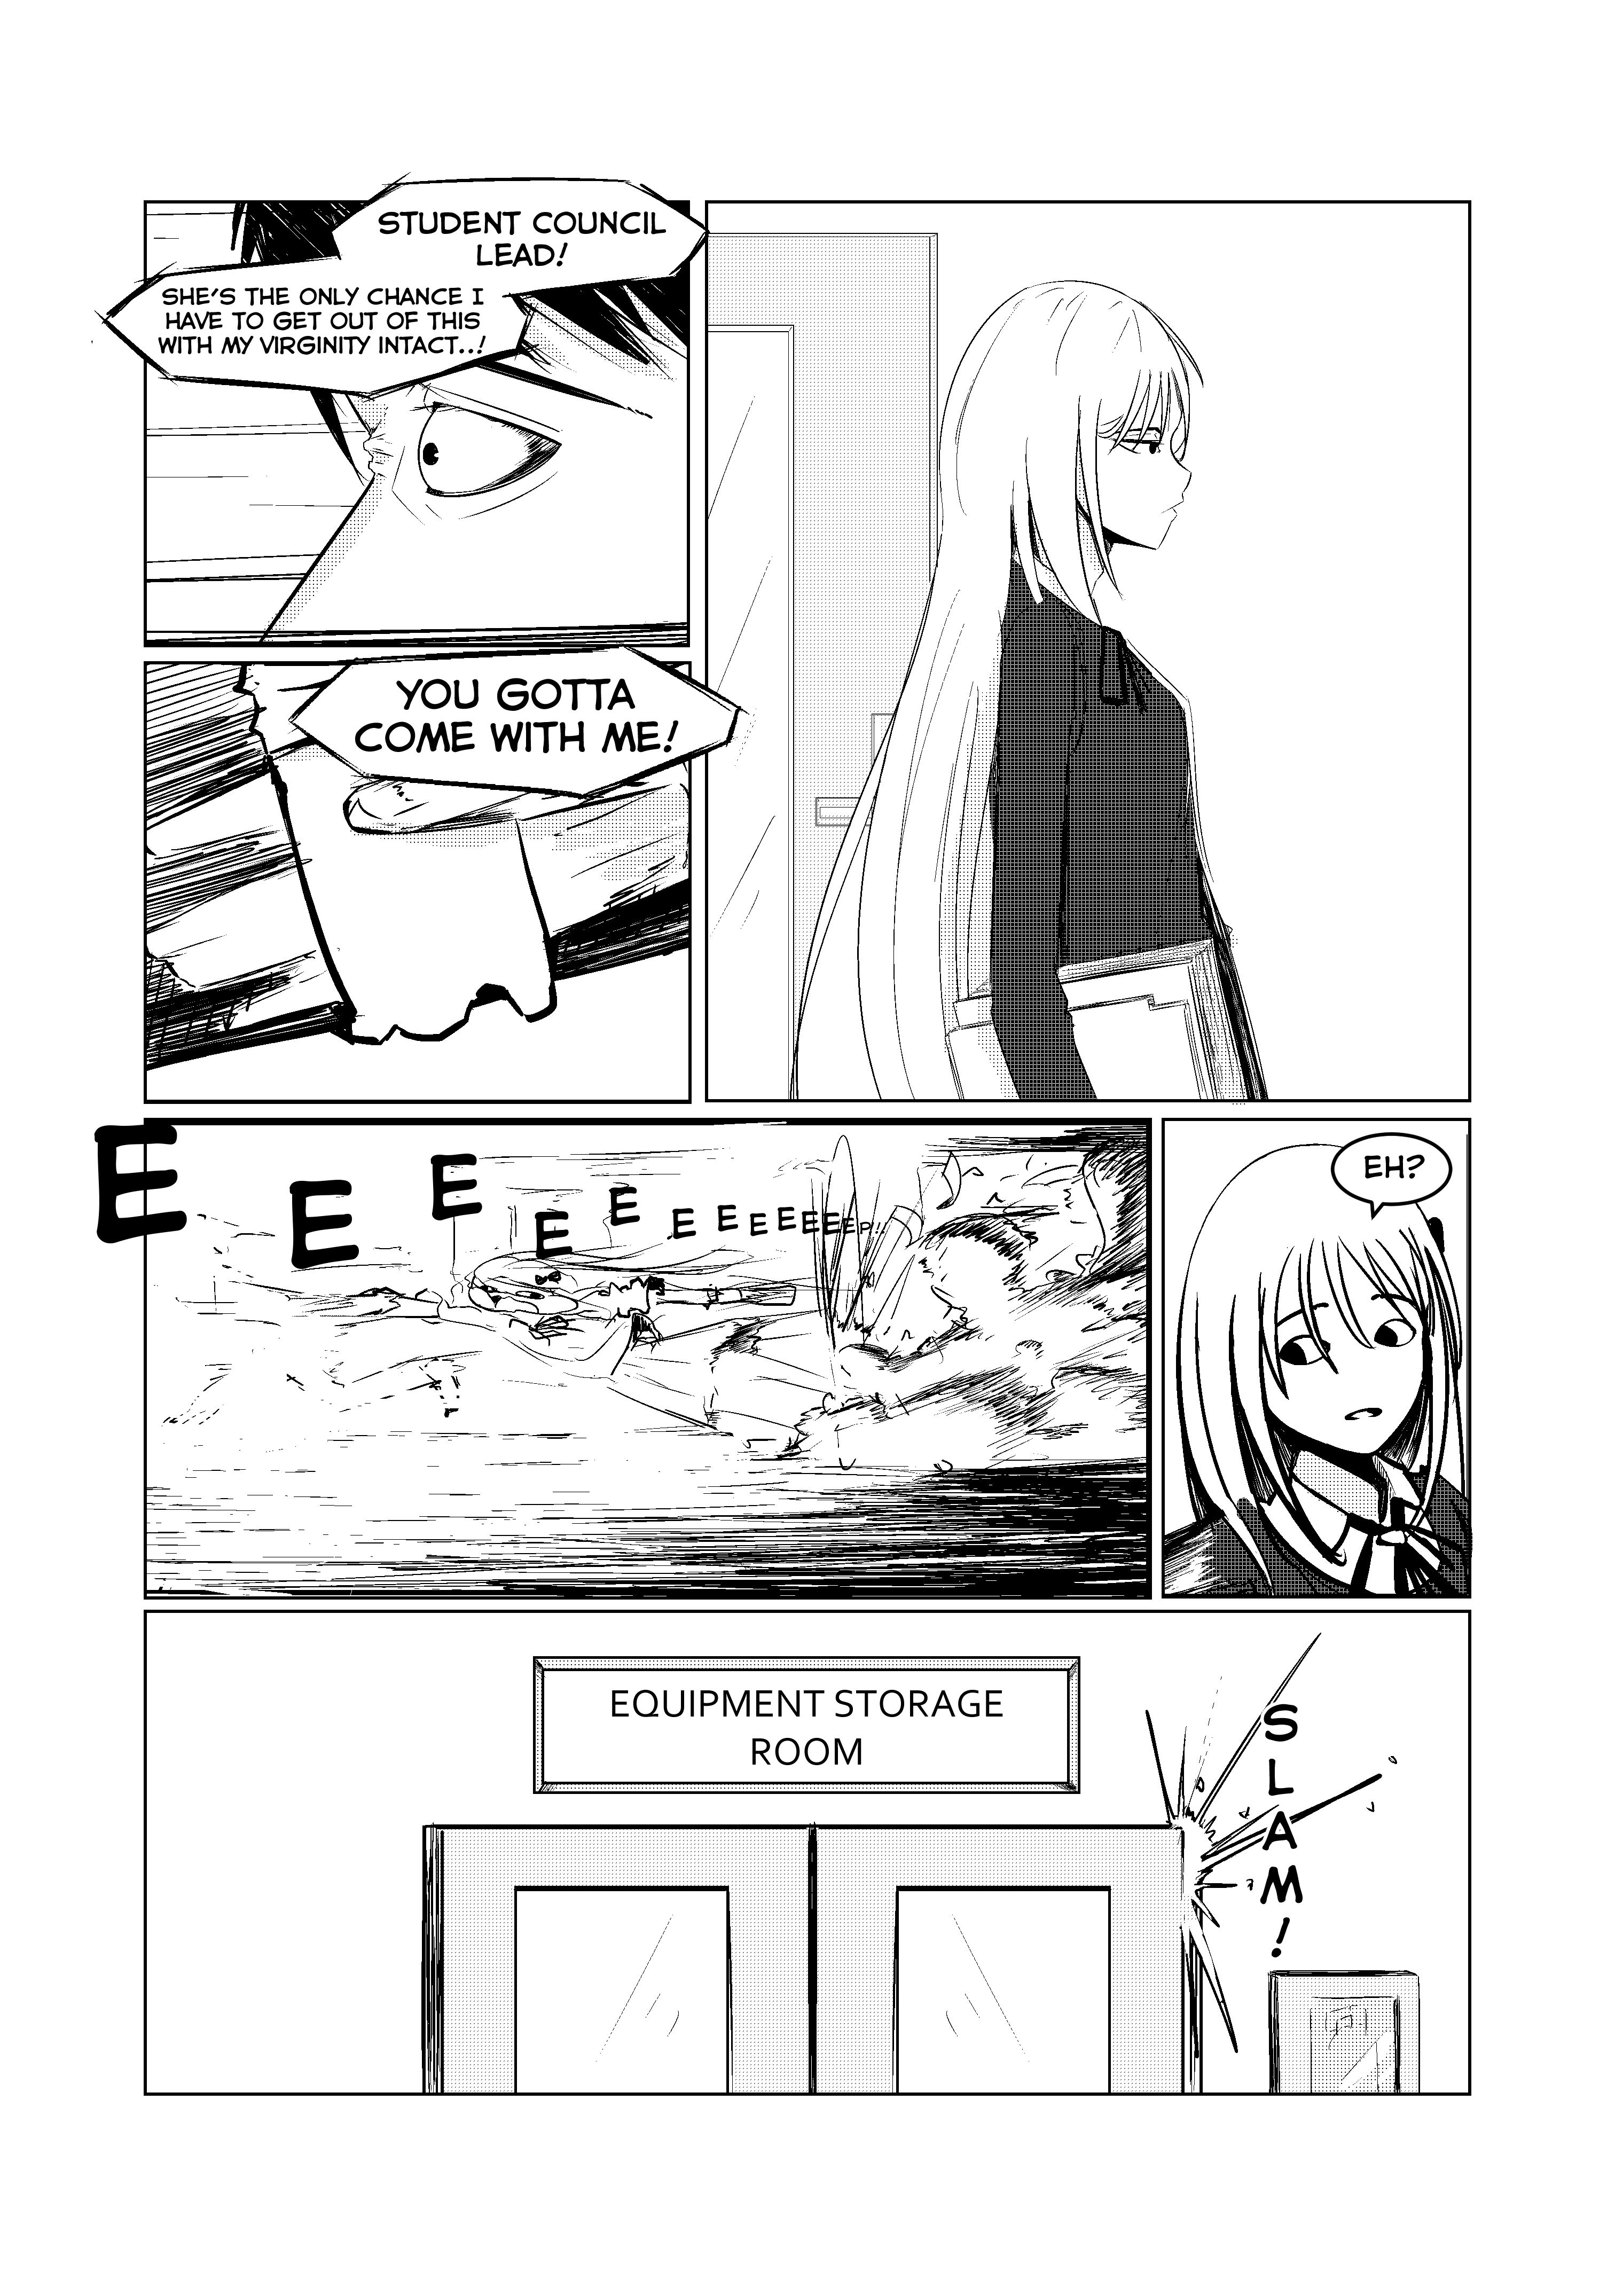 Opposites In Disguise - 1 page 37